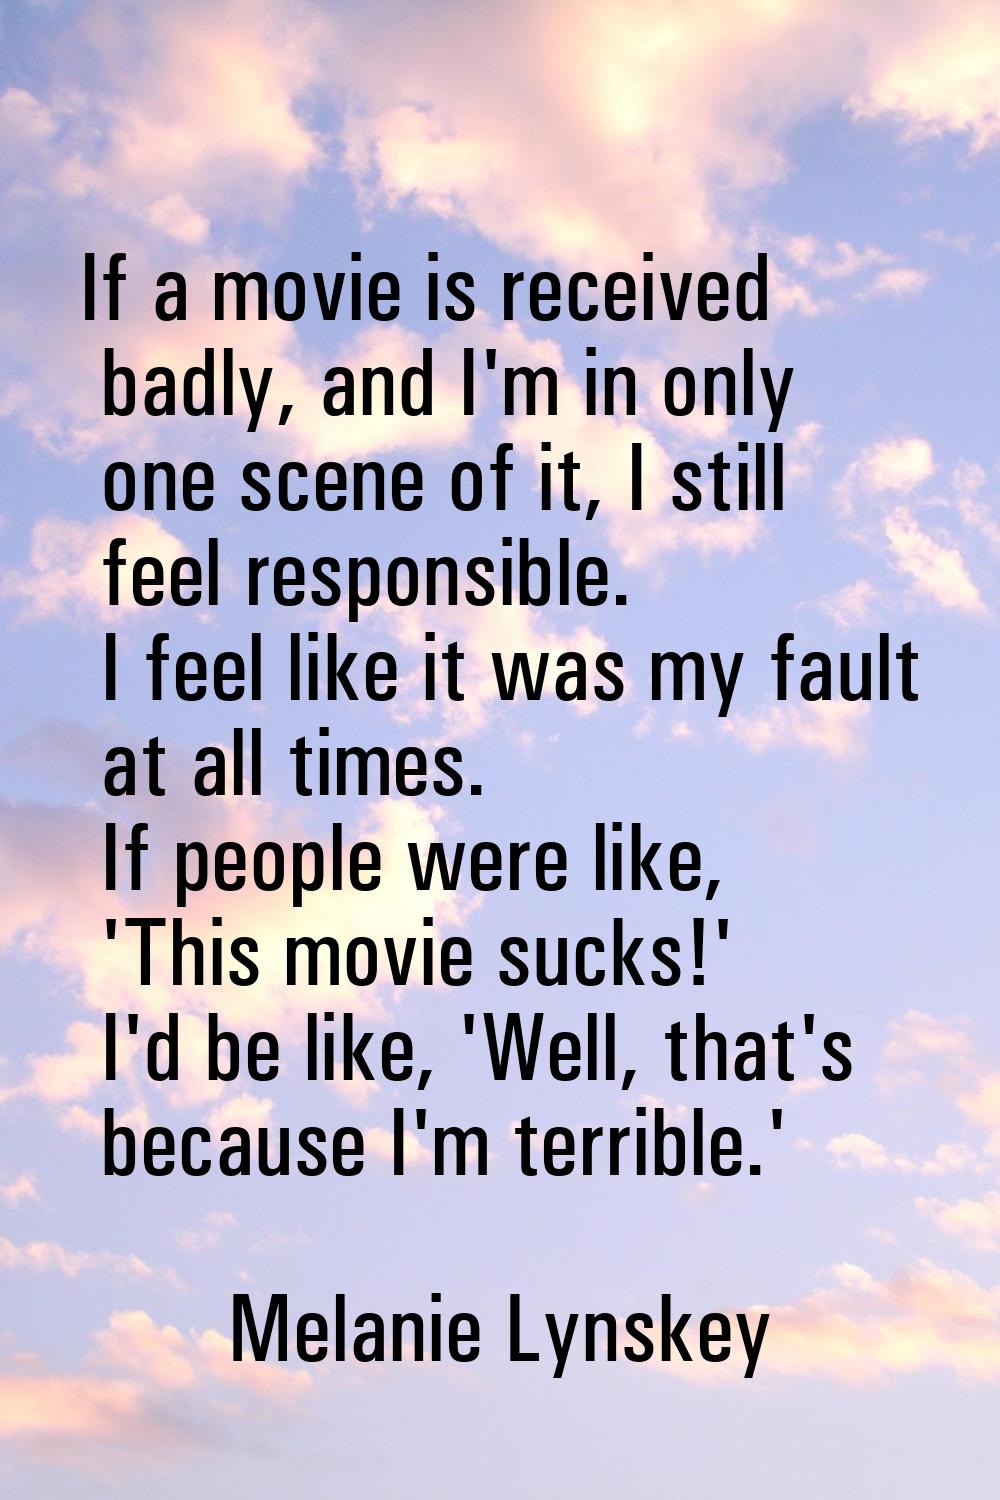 If a movie is received badly, and I'm in only one scene of it, I still feel responsible. I feel lik